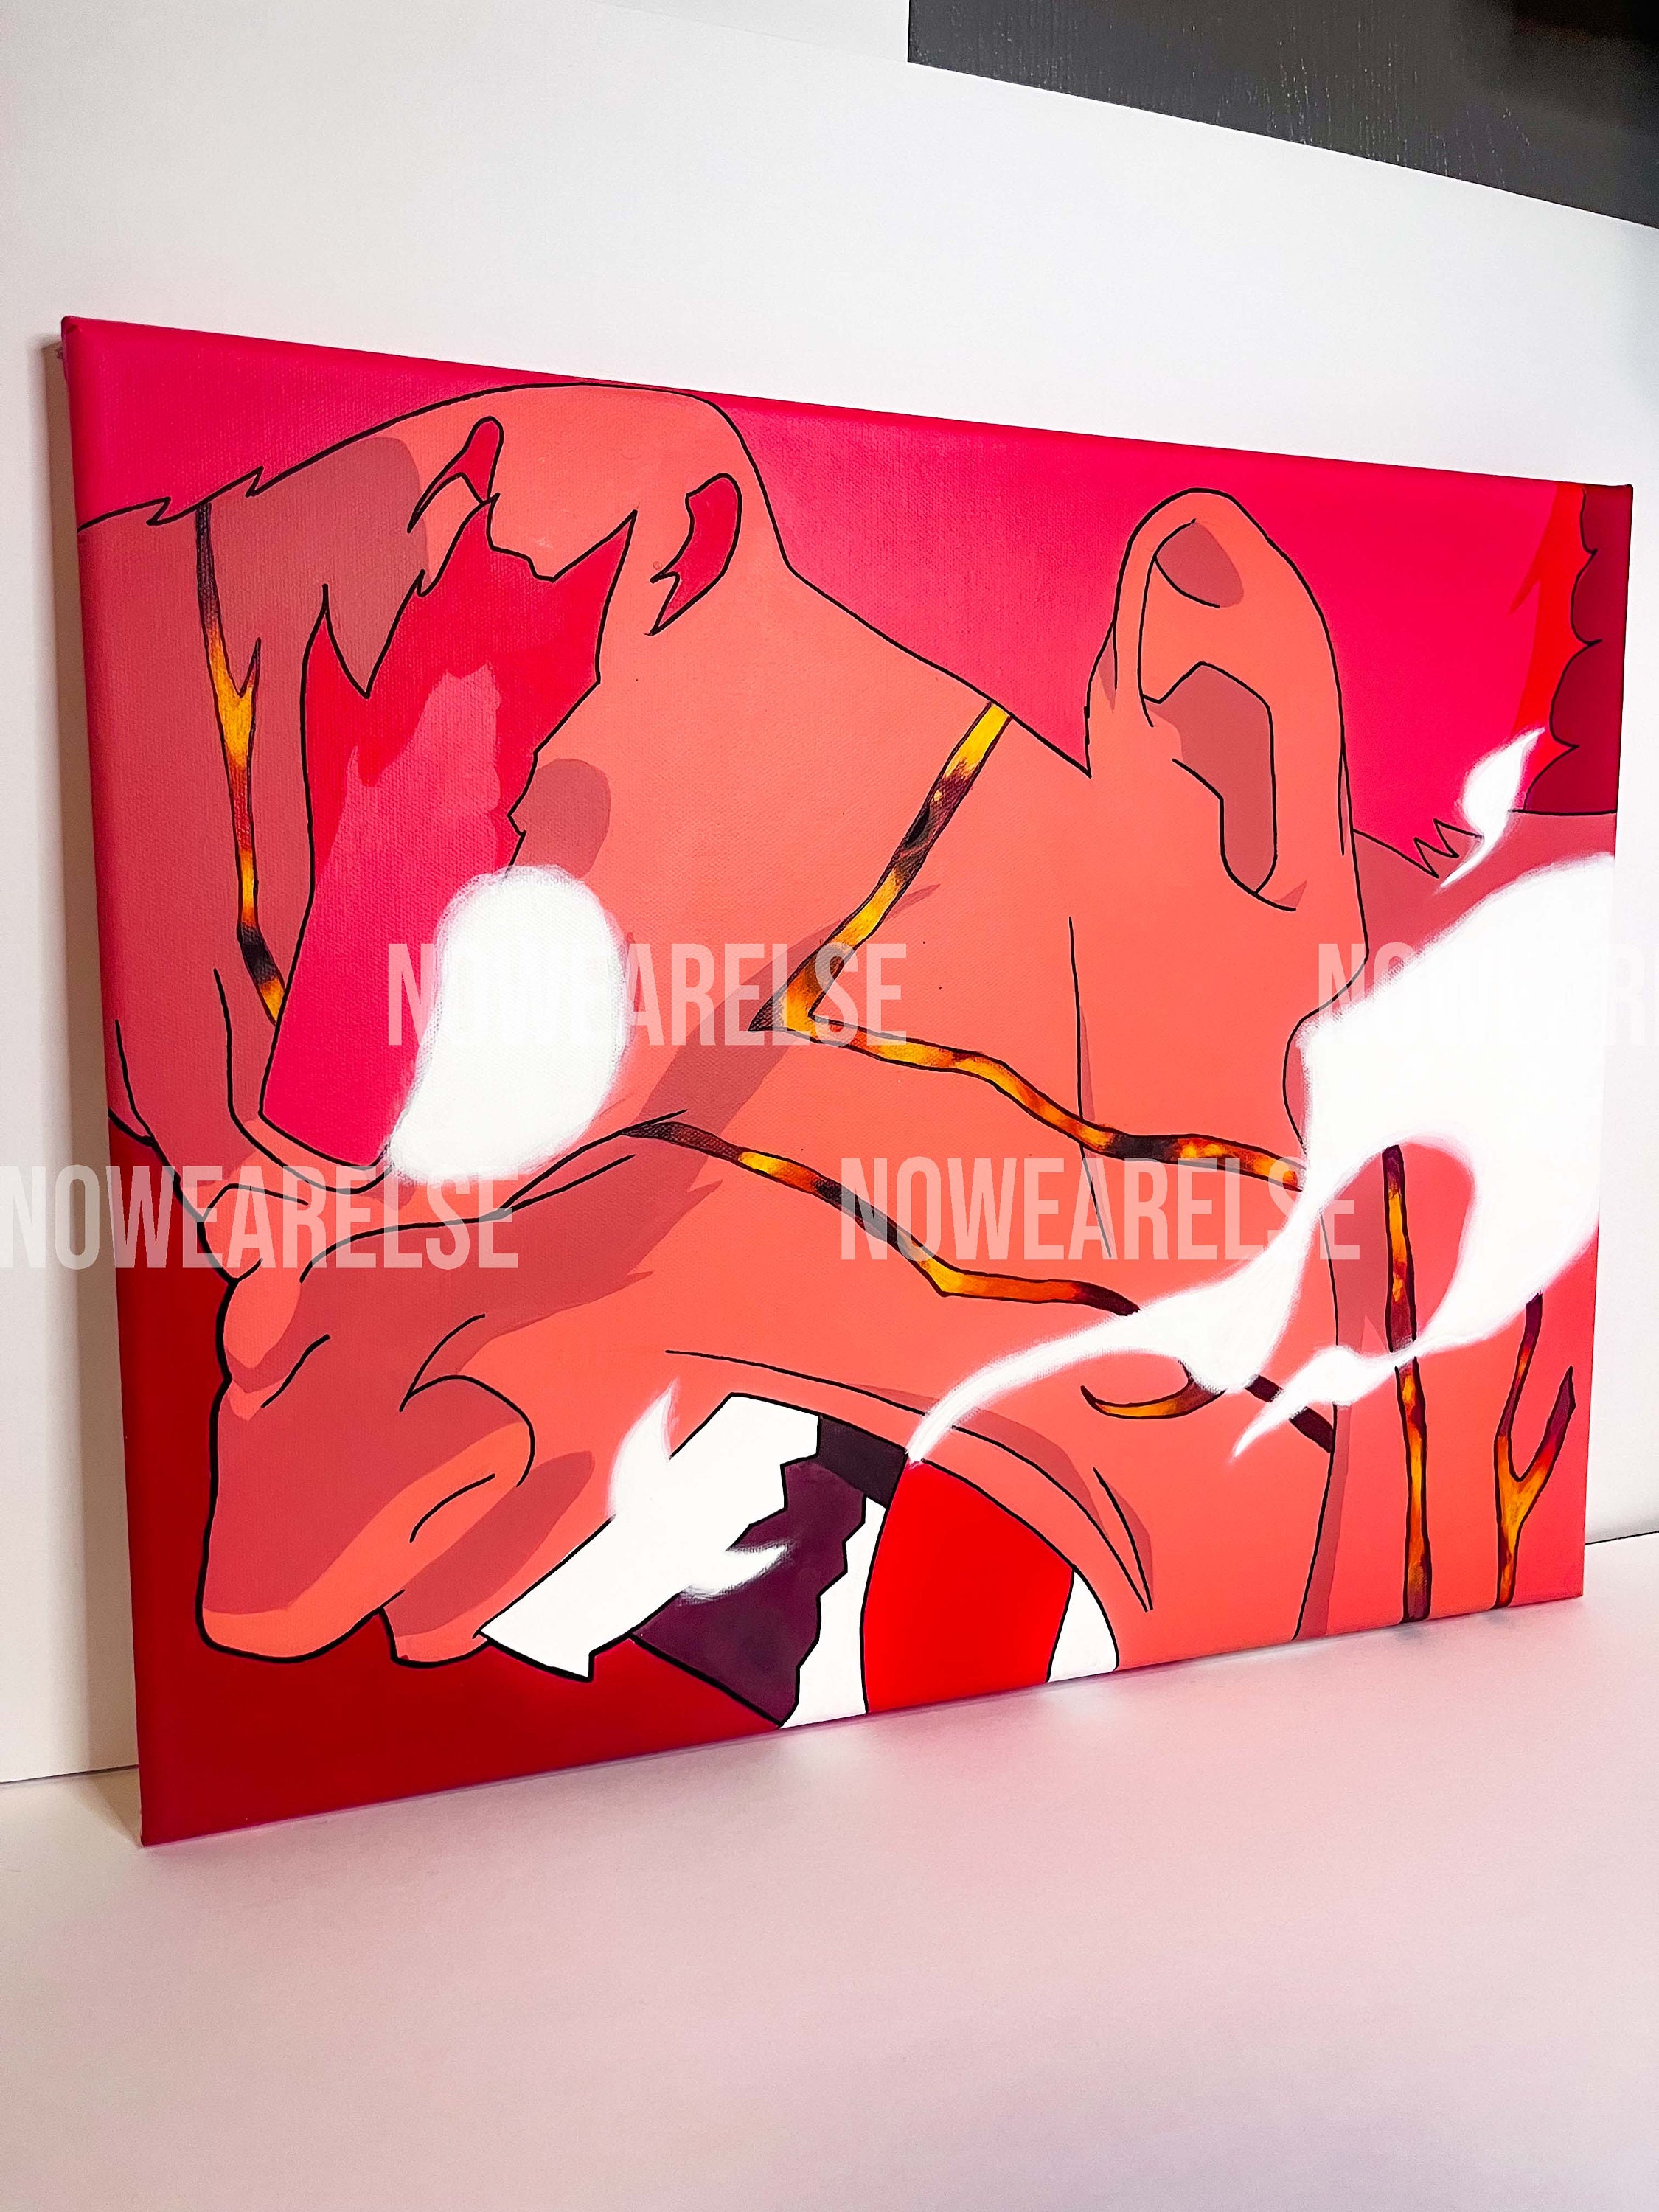 Anime Naruto Third Hokage Vs Orochimaru Poster Canvas Poster Wall Art Decor  Print Picture Paintings for Living Room Bedroom Decoration  Frame:12×18inch(30×45cm) : : Home